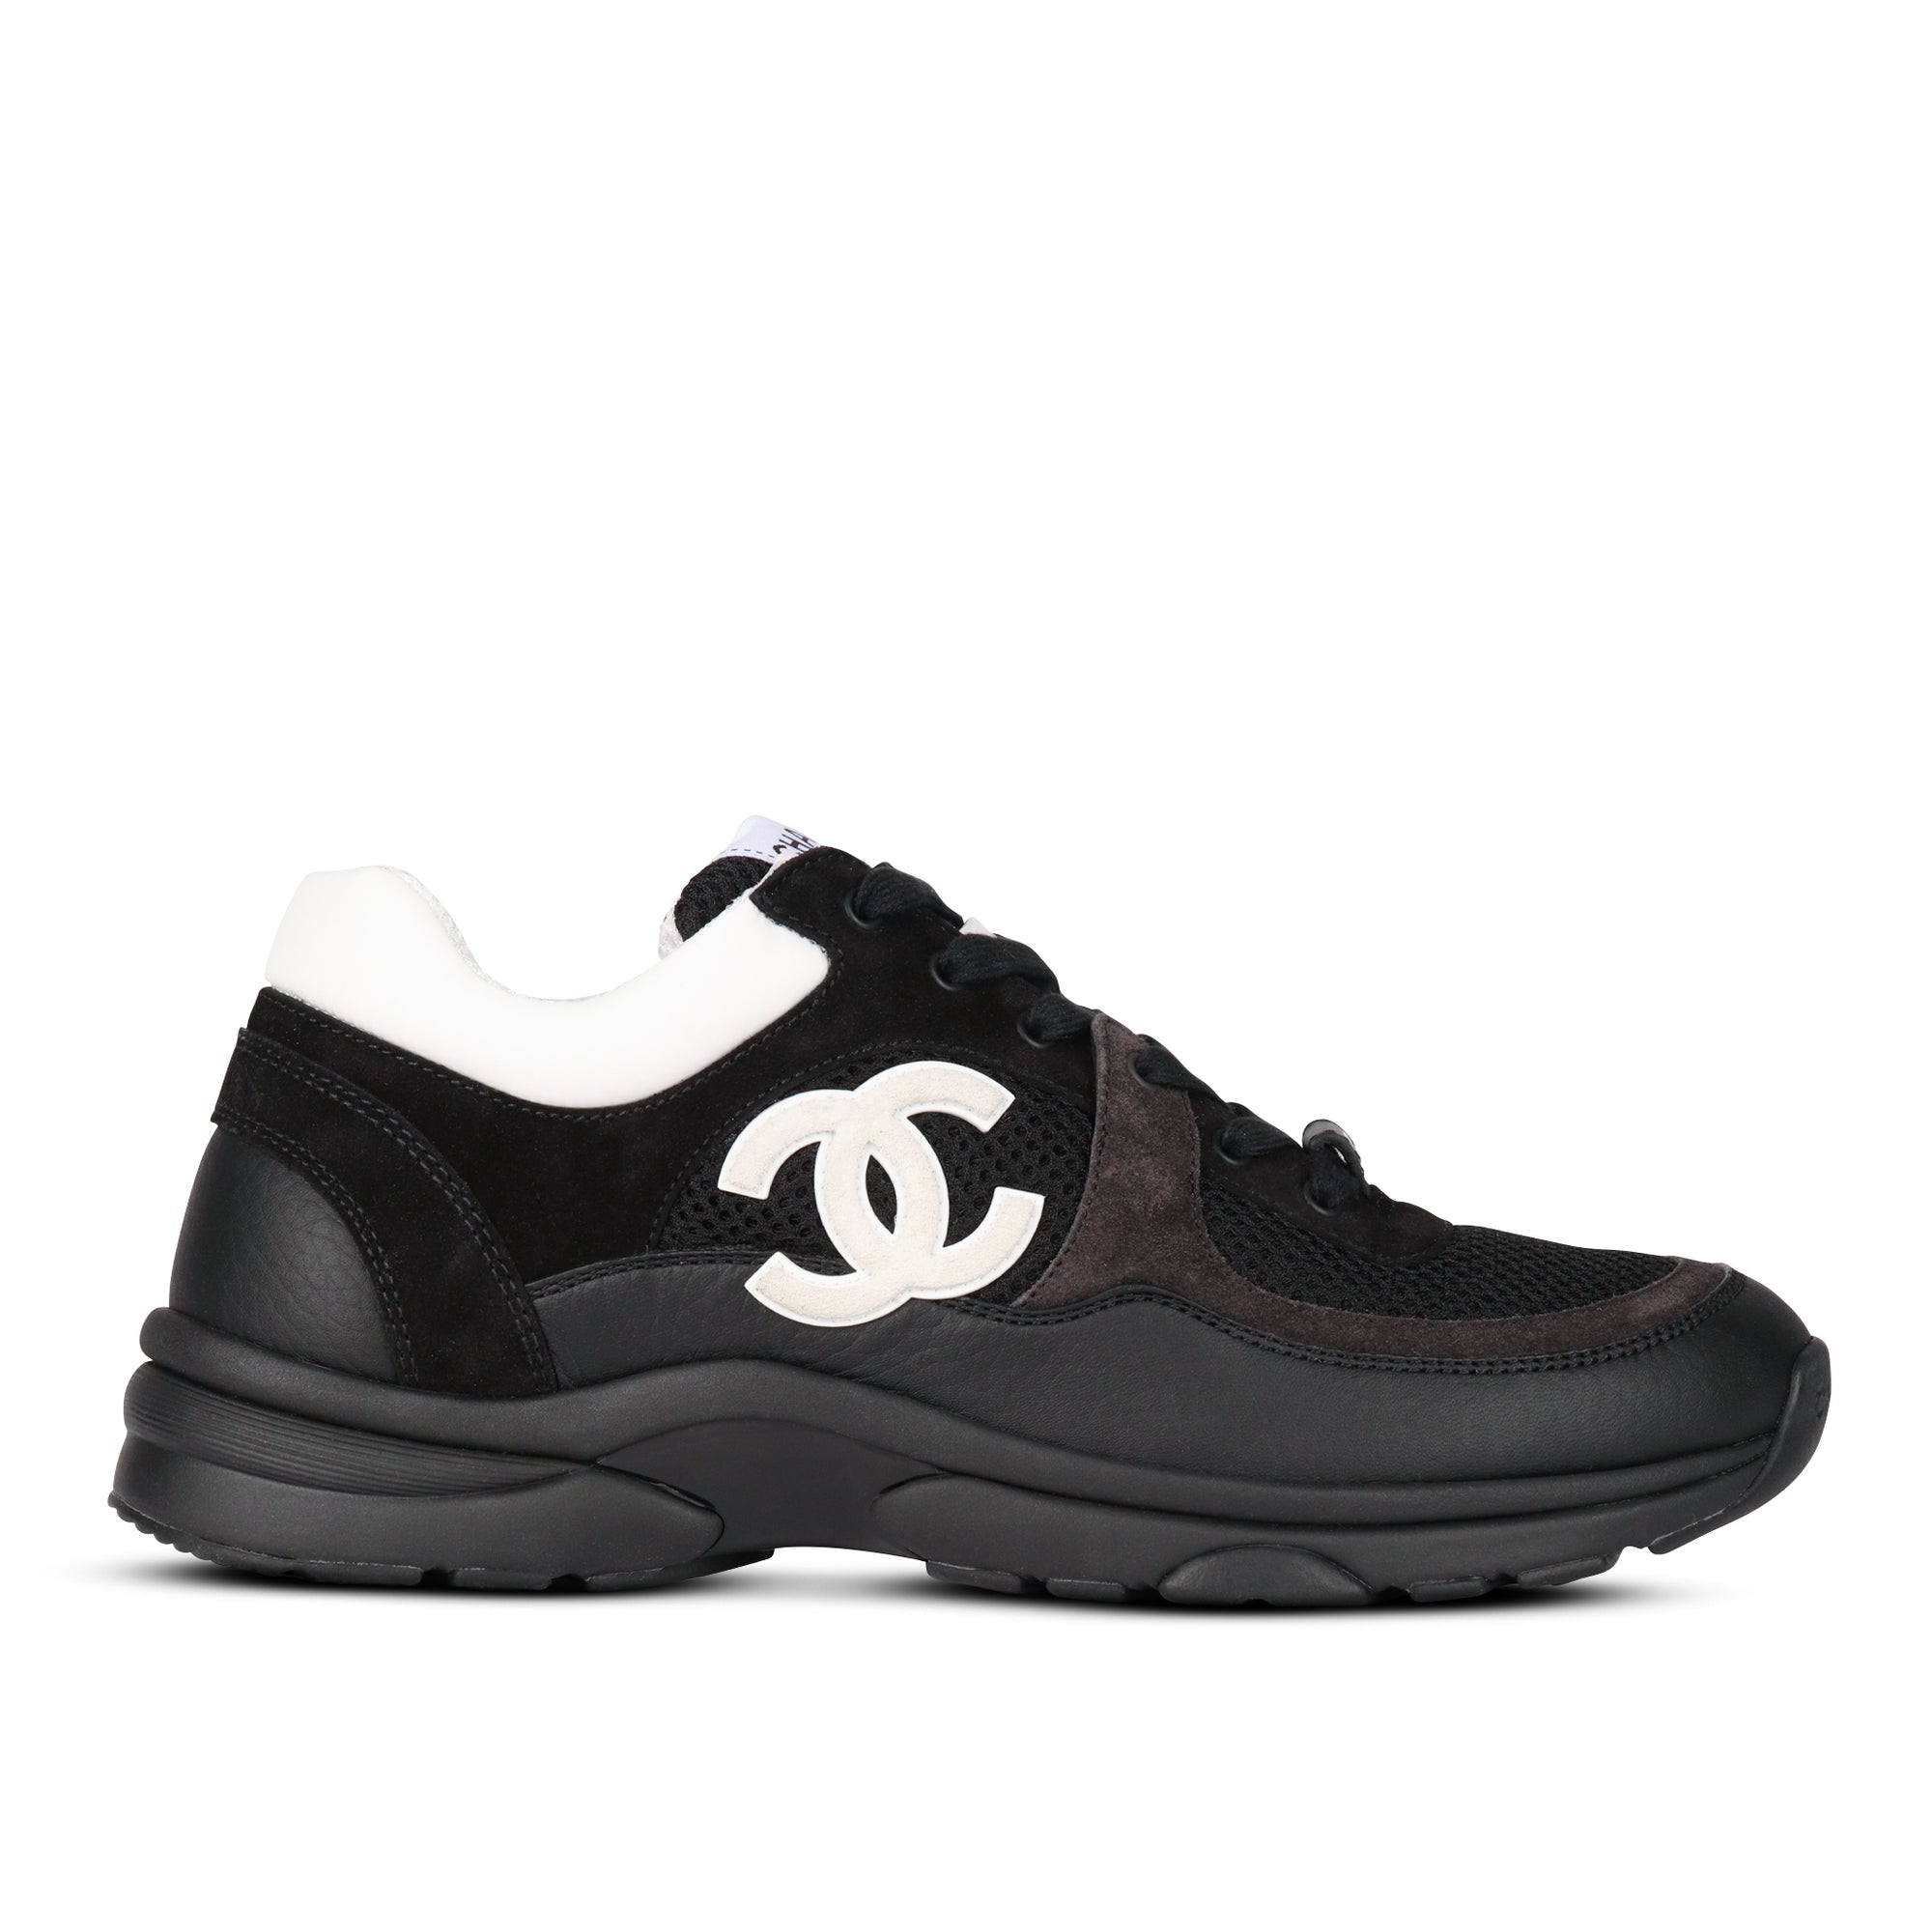 Chanel Black Neoprene Fabric CC Low Top Sneakers Size 38 Chanel